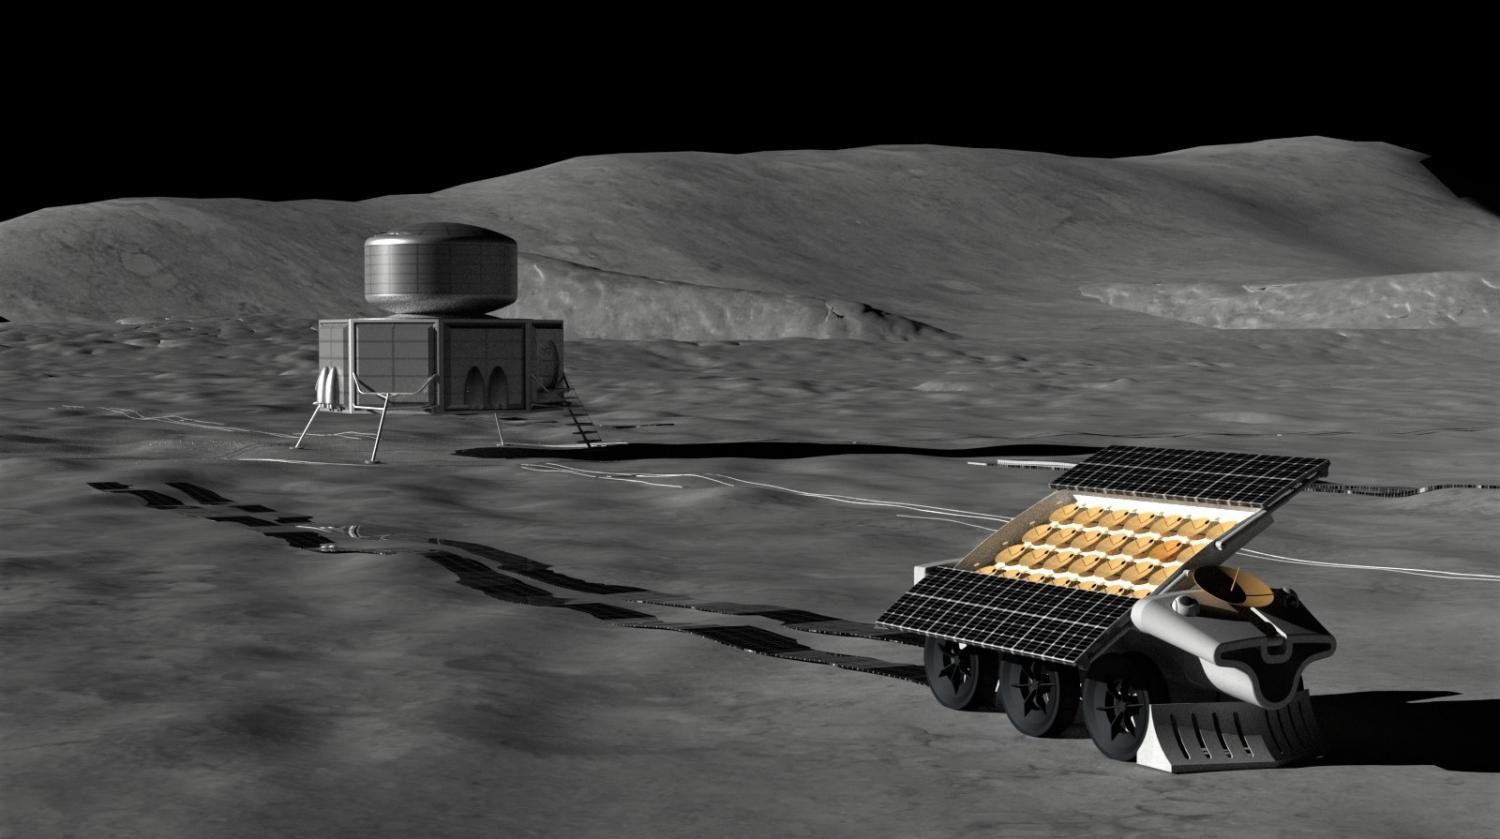 NASA considers a radio telescope on the other side of the moon